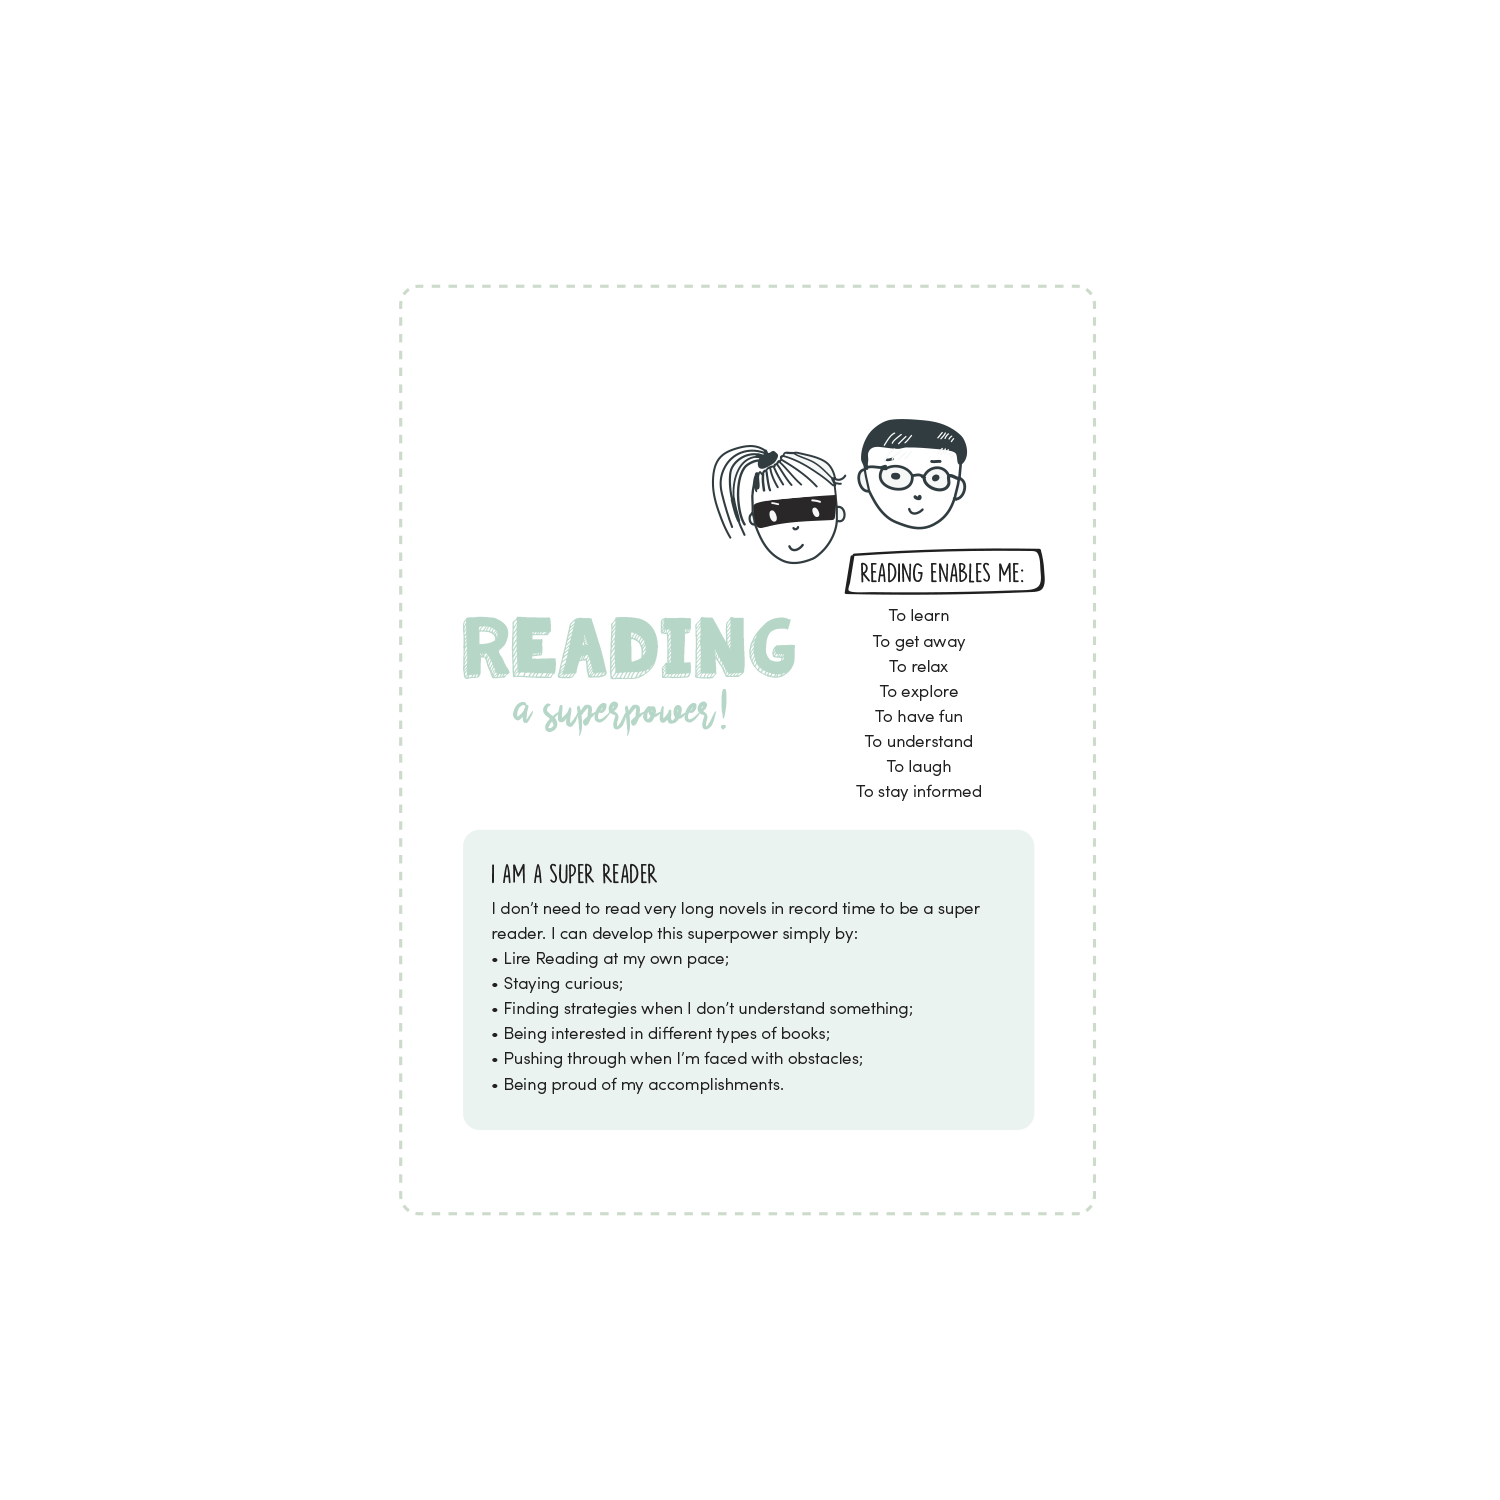 English version of the Reading a superpower document made by Les Belles Combines